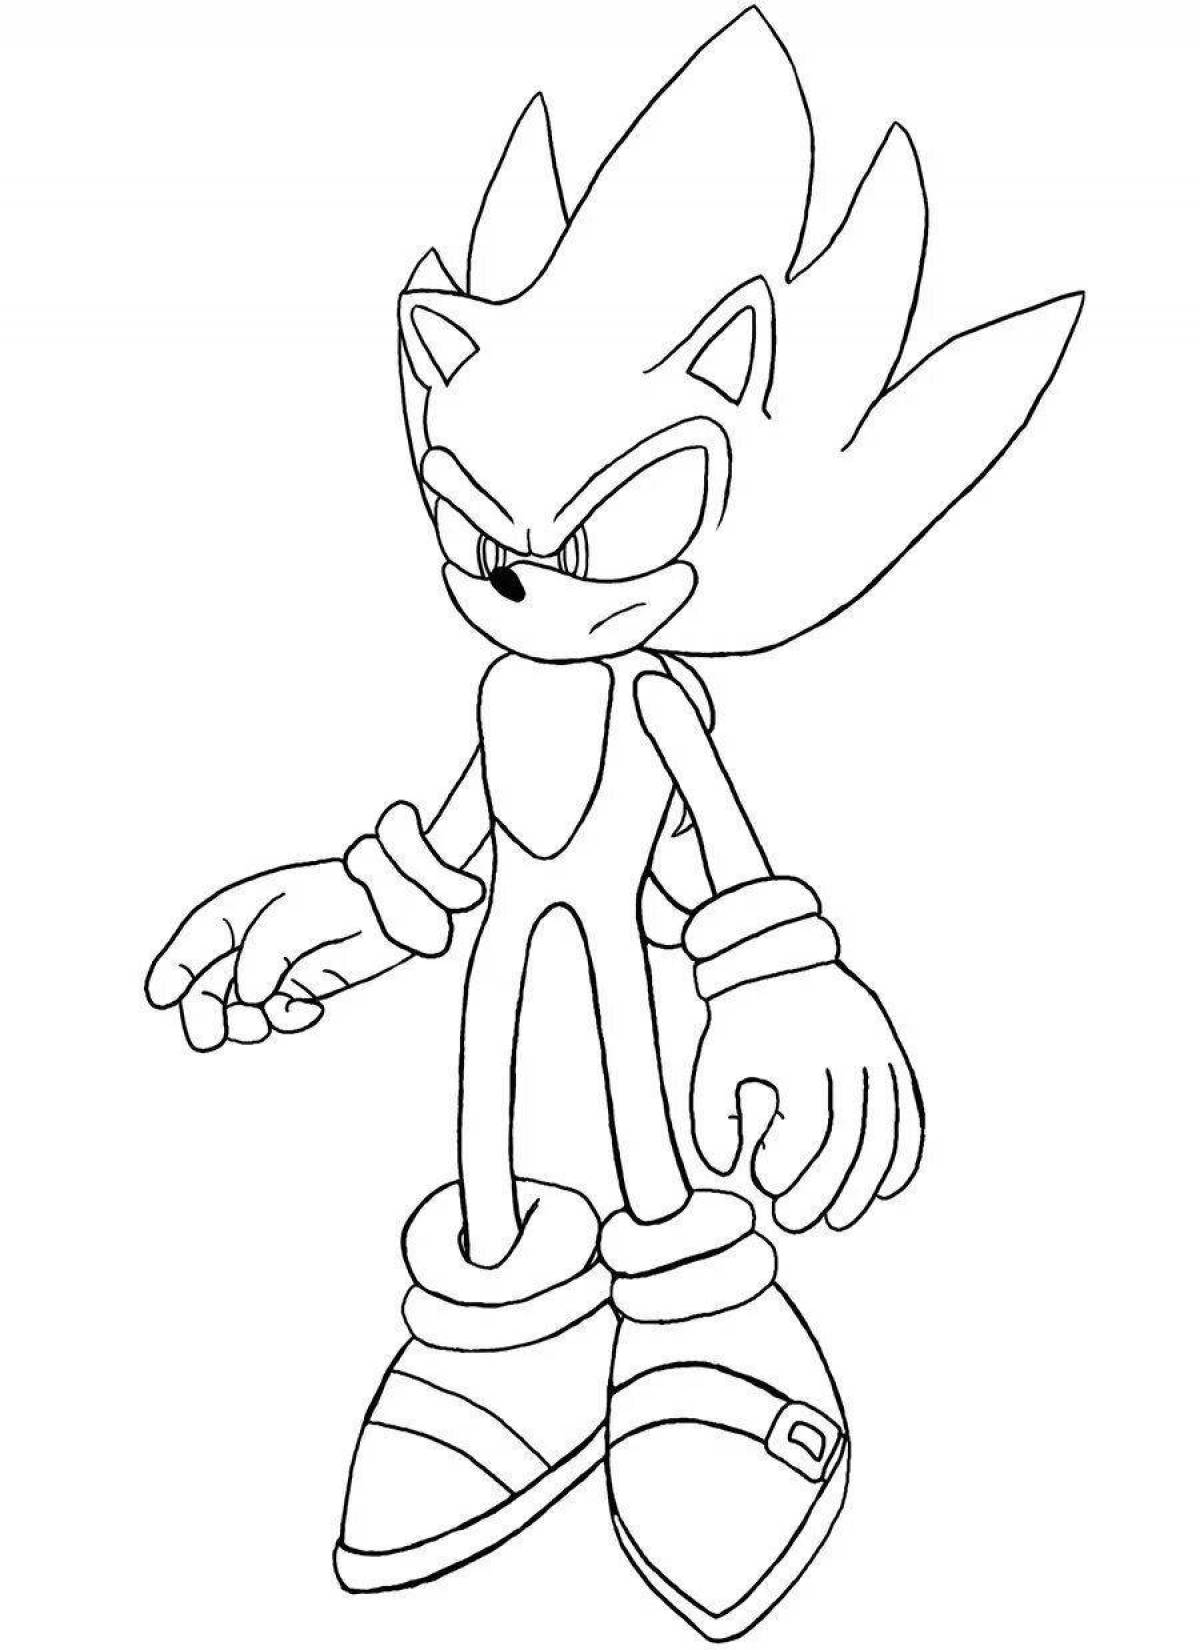 Sparkling sonic exe coloring book for kids